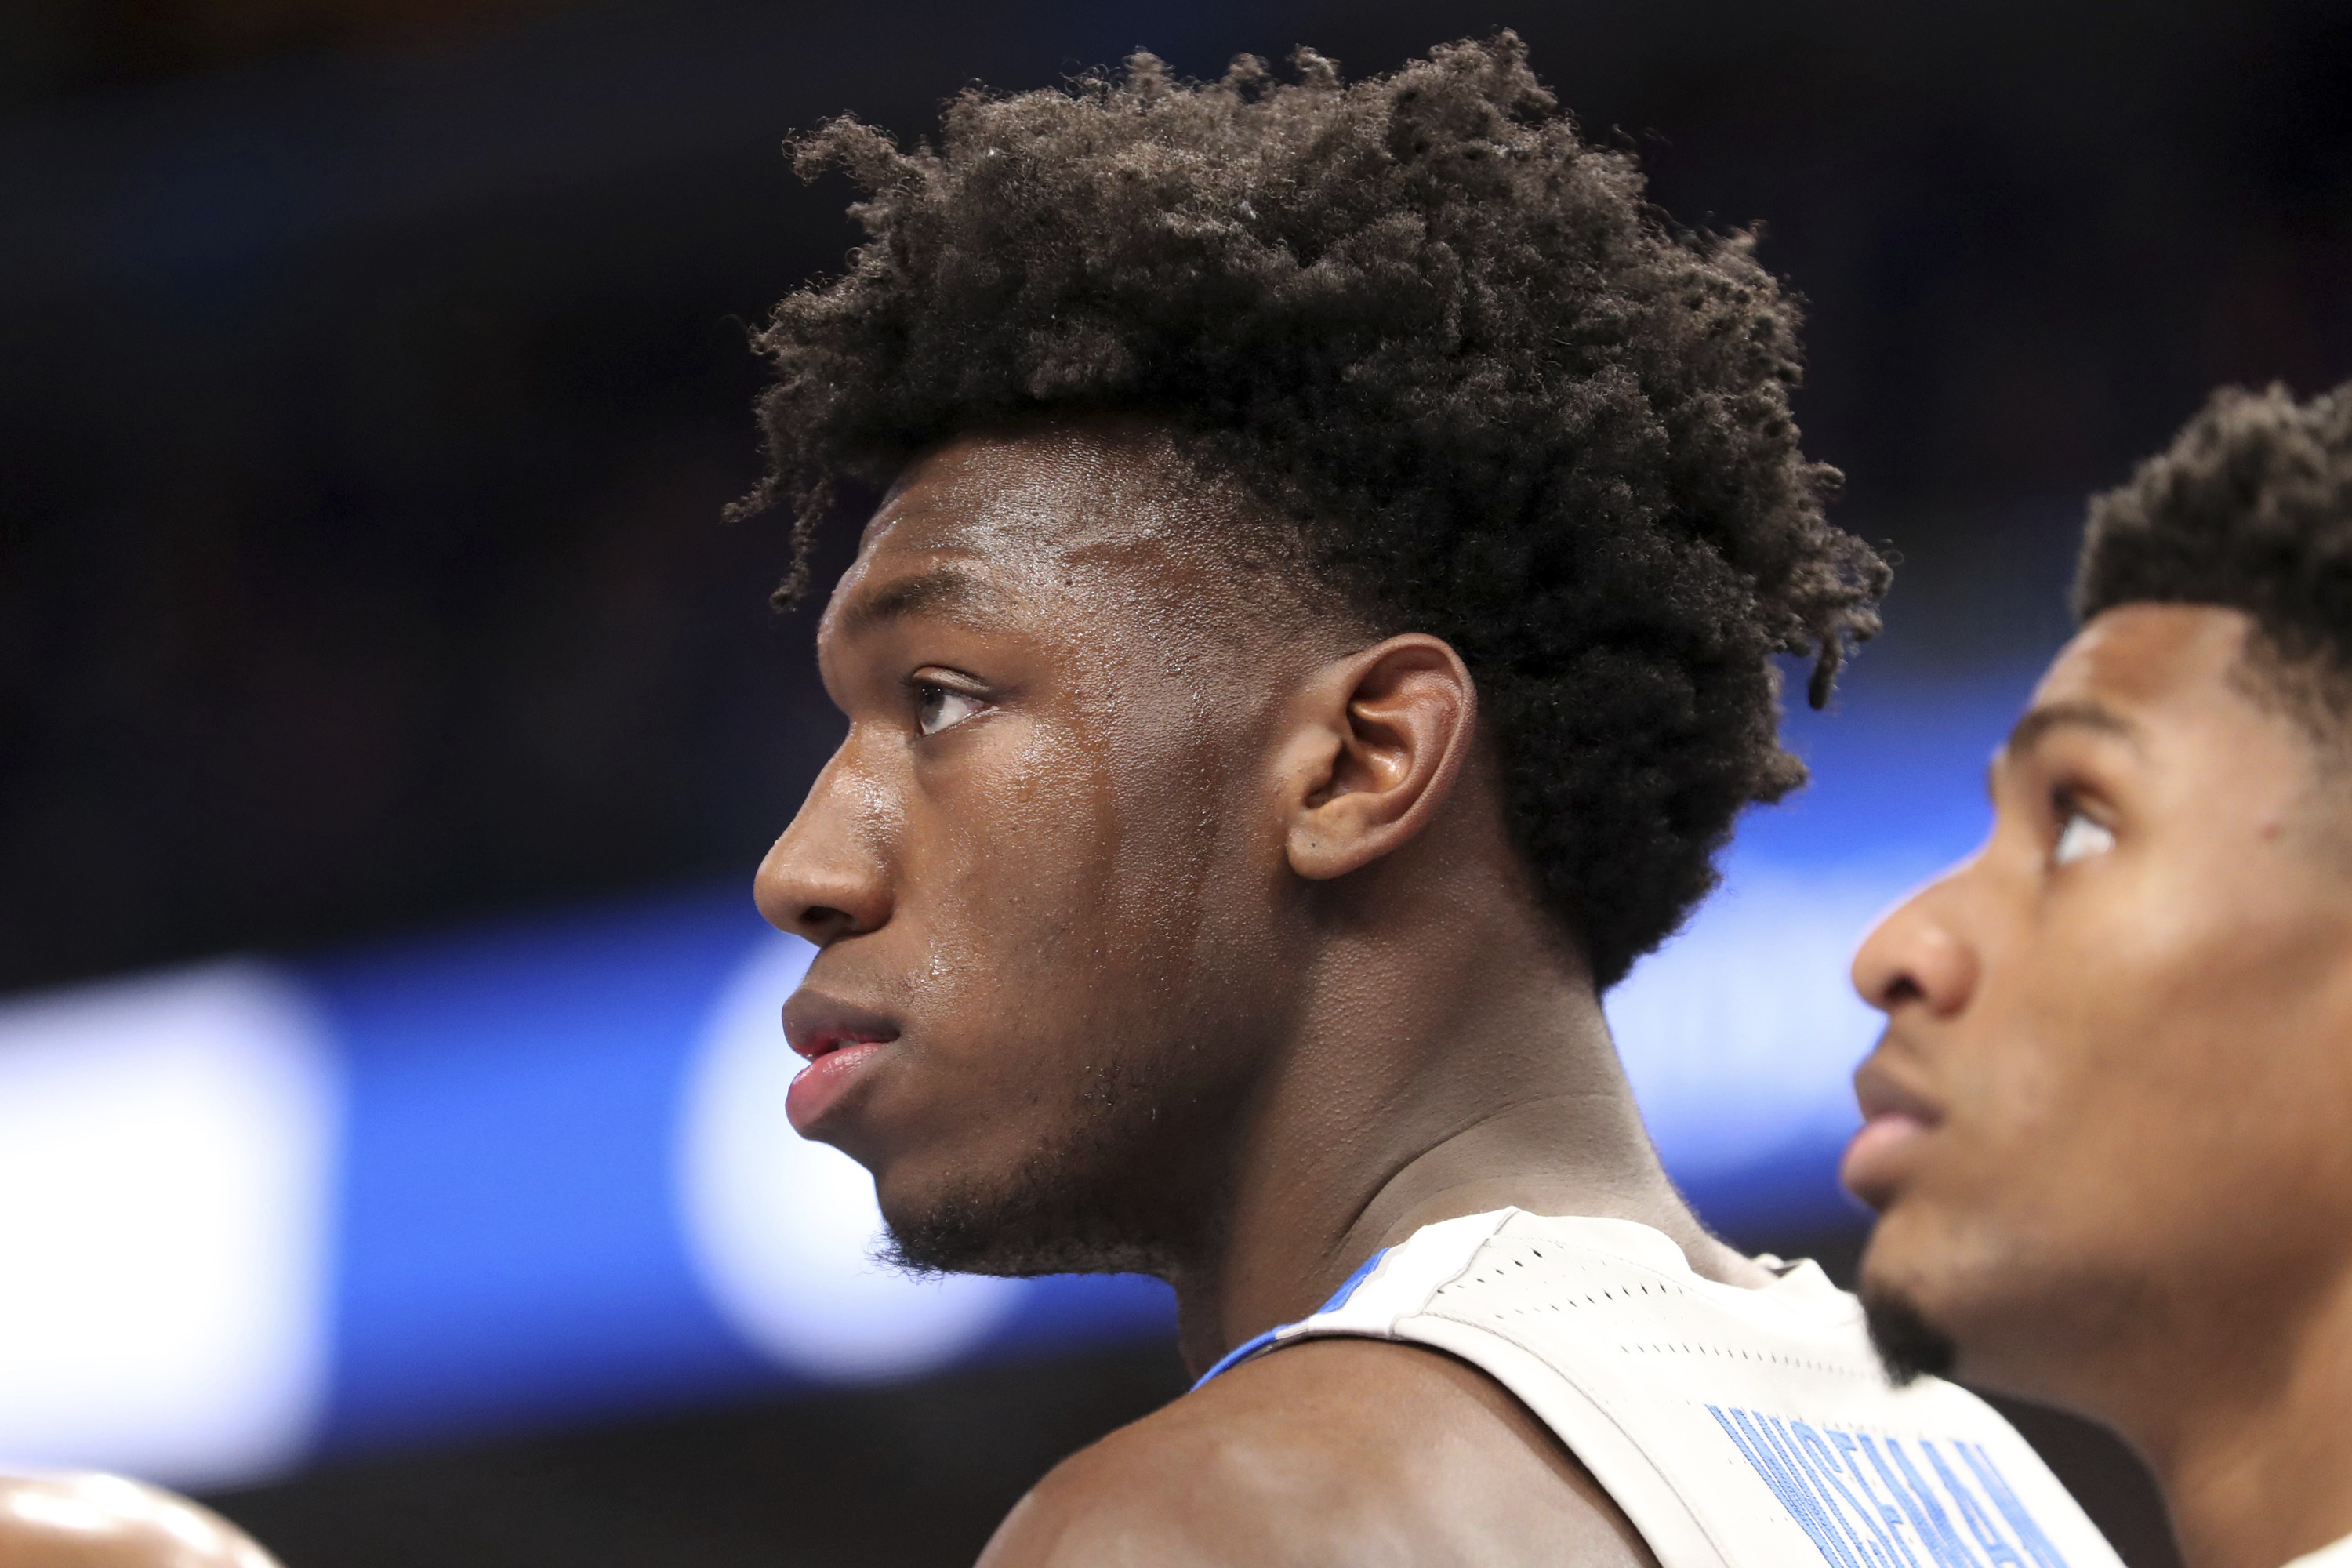 Wiseman gets restraining order, plays for No. 14 Memphis